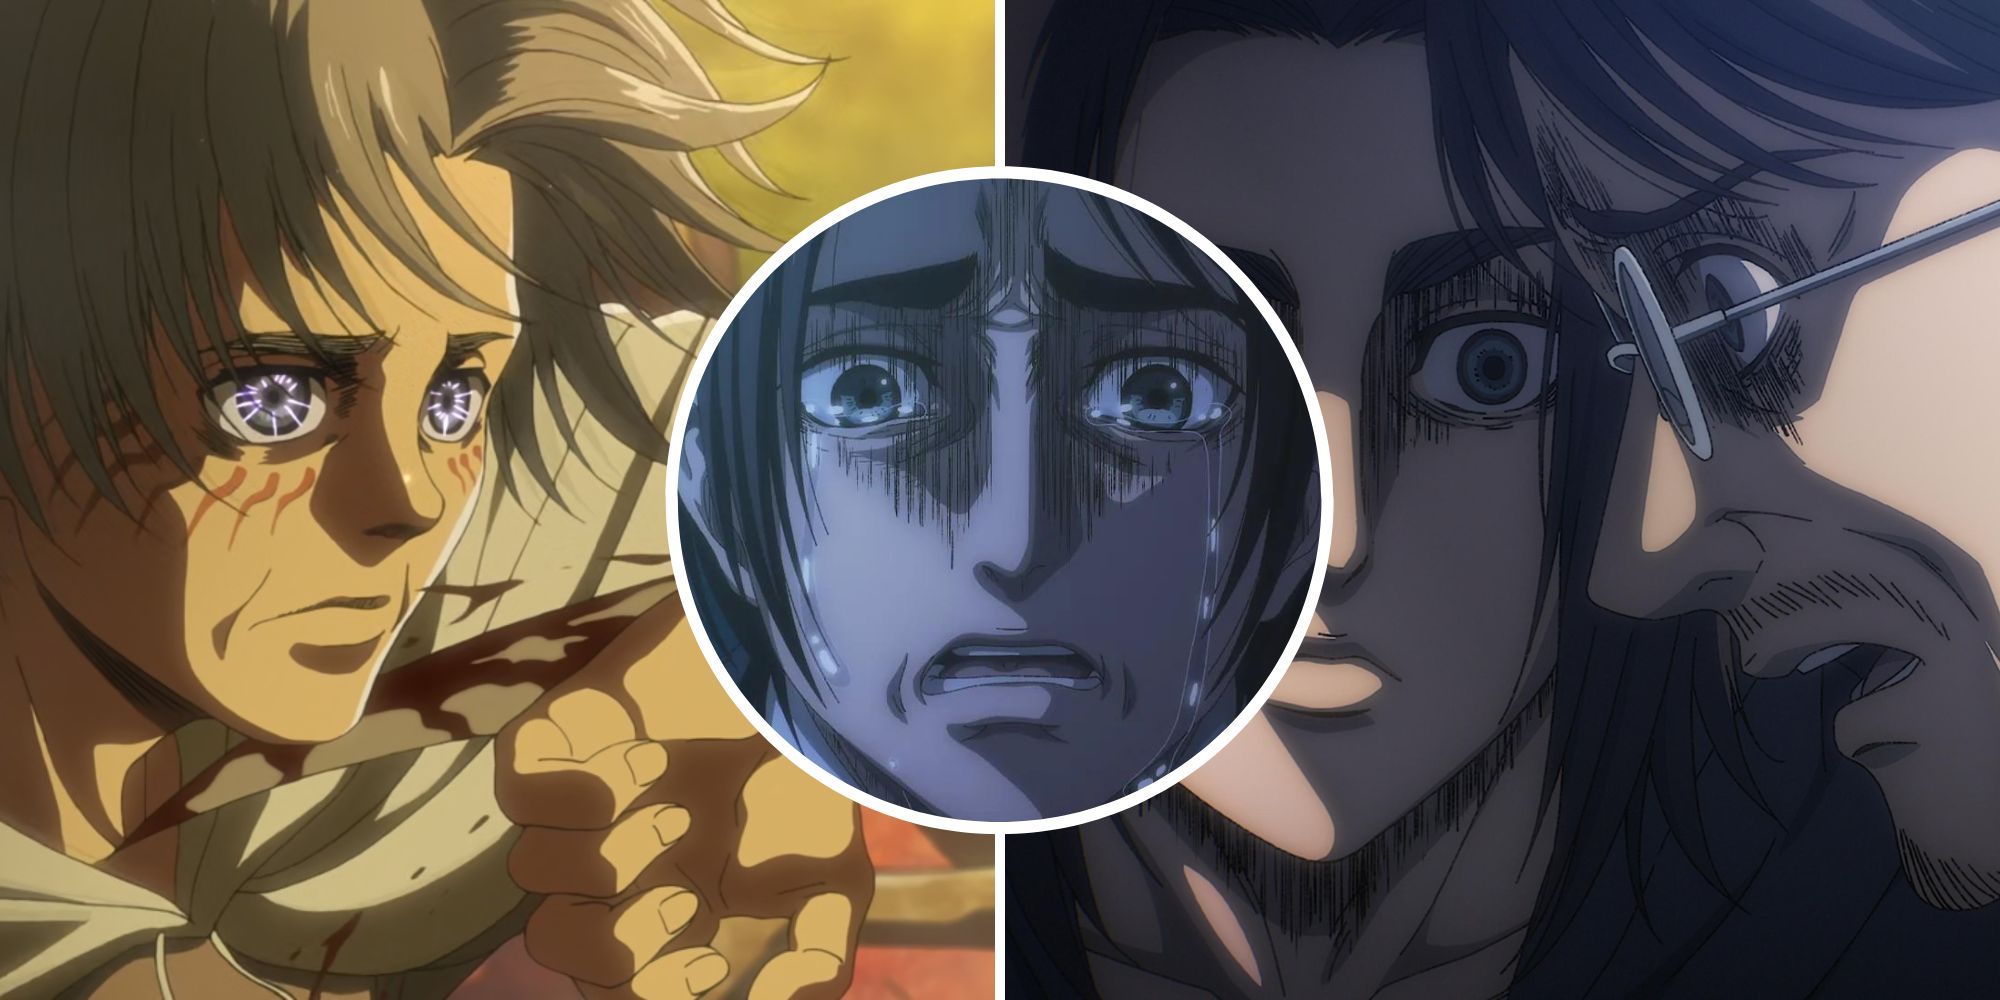 Attack on Titan”'s philosophy [Part I]: How ethical is the extinction of  humanity?